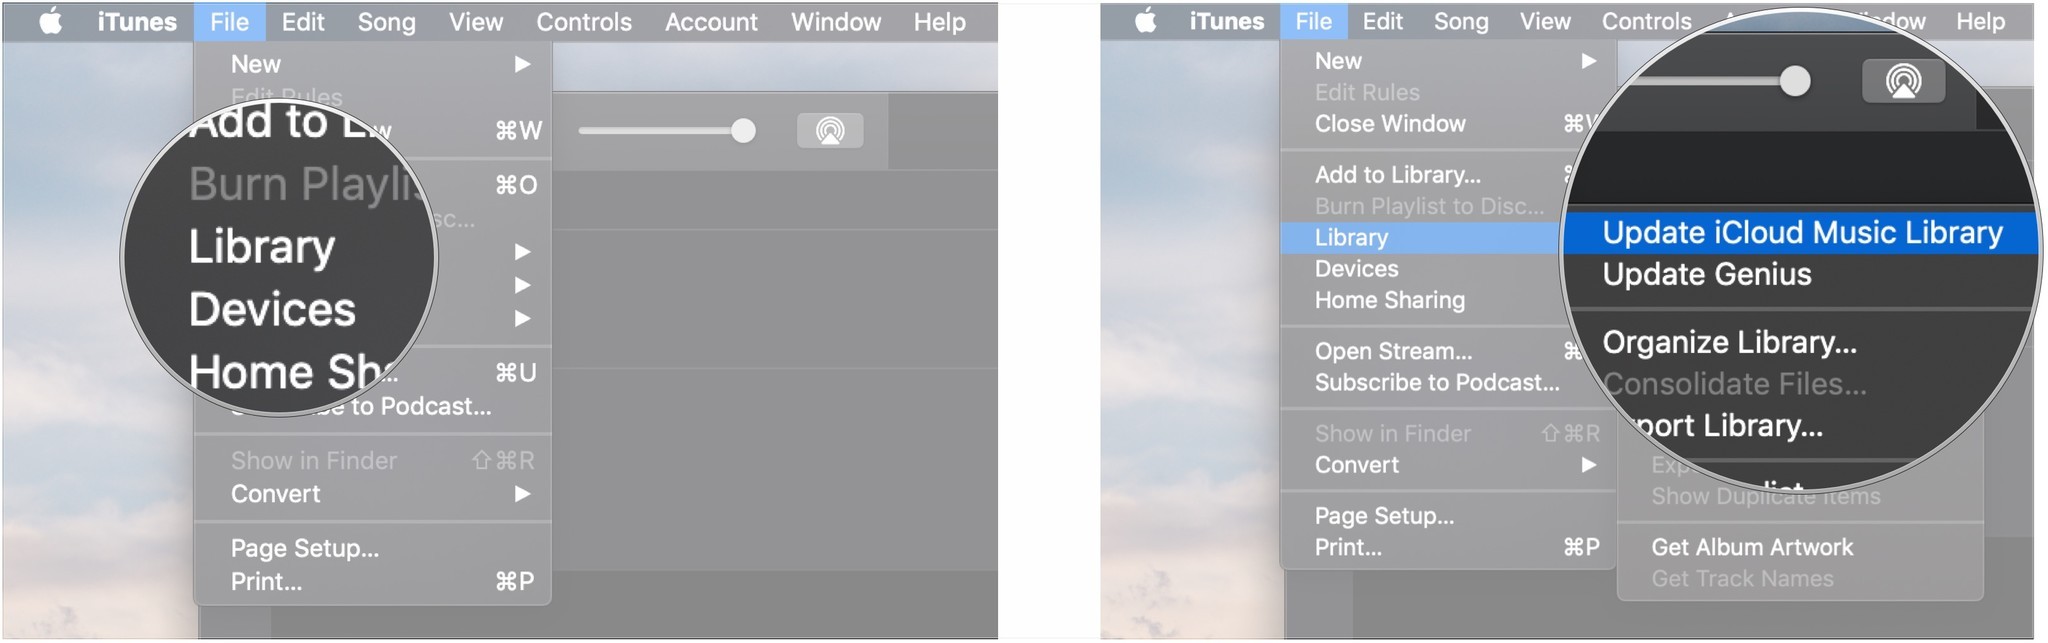 Hover cursor over Library, click Update iCloud Music Library